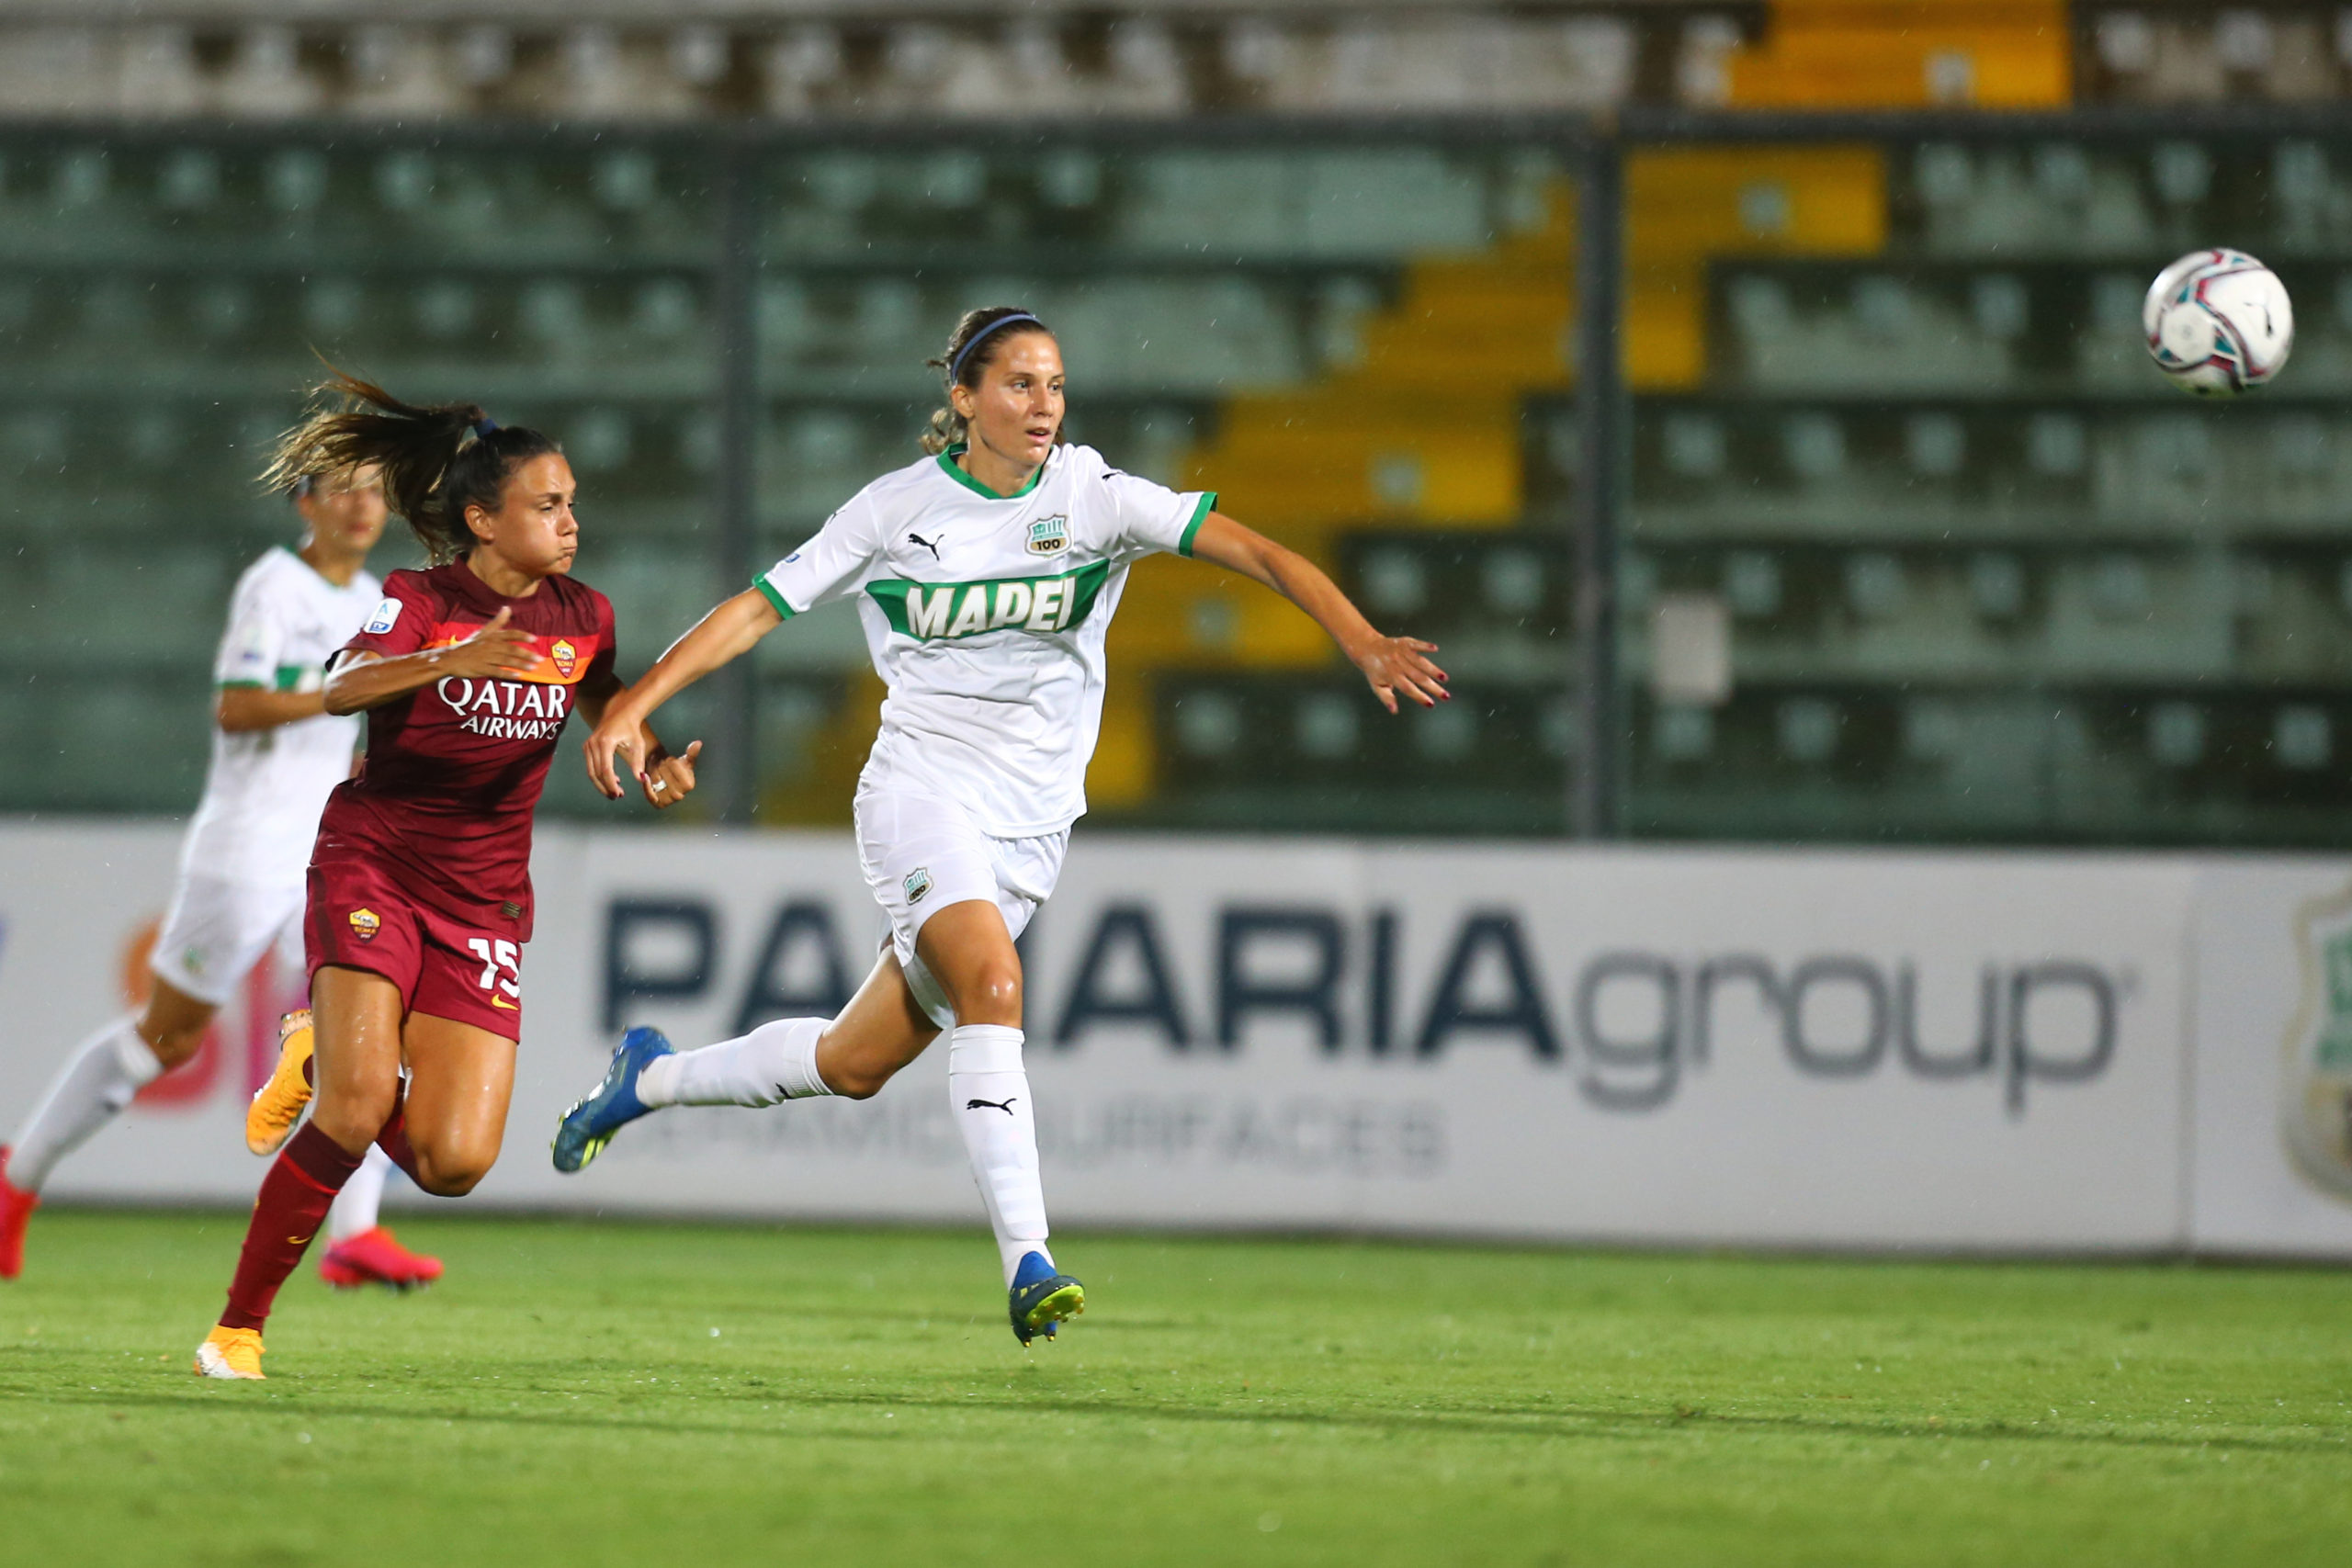 As part of our interview series at The Cult of Calcio we talked with Sophie Brundin of Sassuolo about how her life as a football player and an entrepreneur